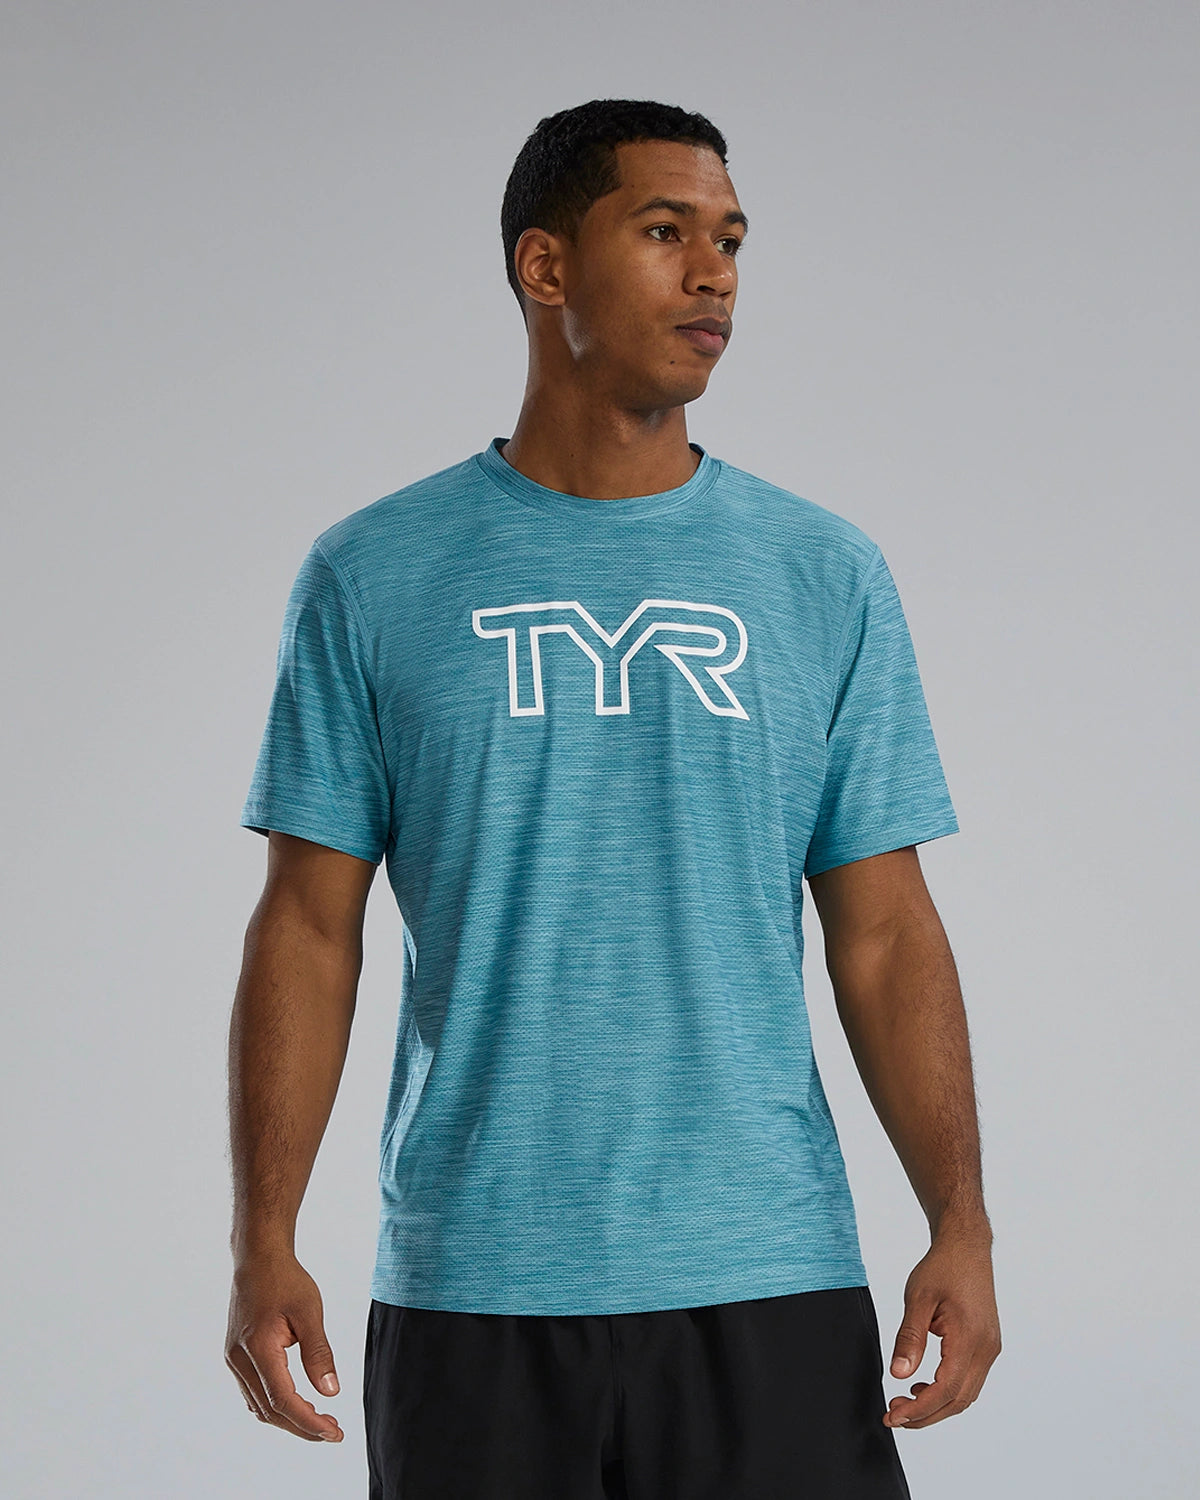 MEN'S LARGE TYR AIRTEC™ LOGO T-SHIRT - SOLID/HEATHER